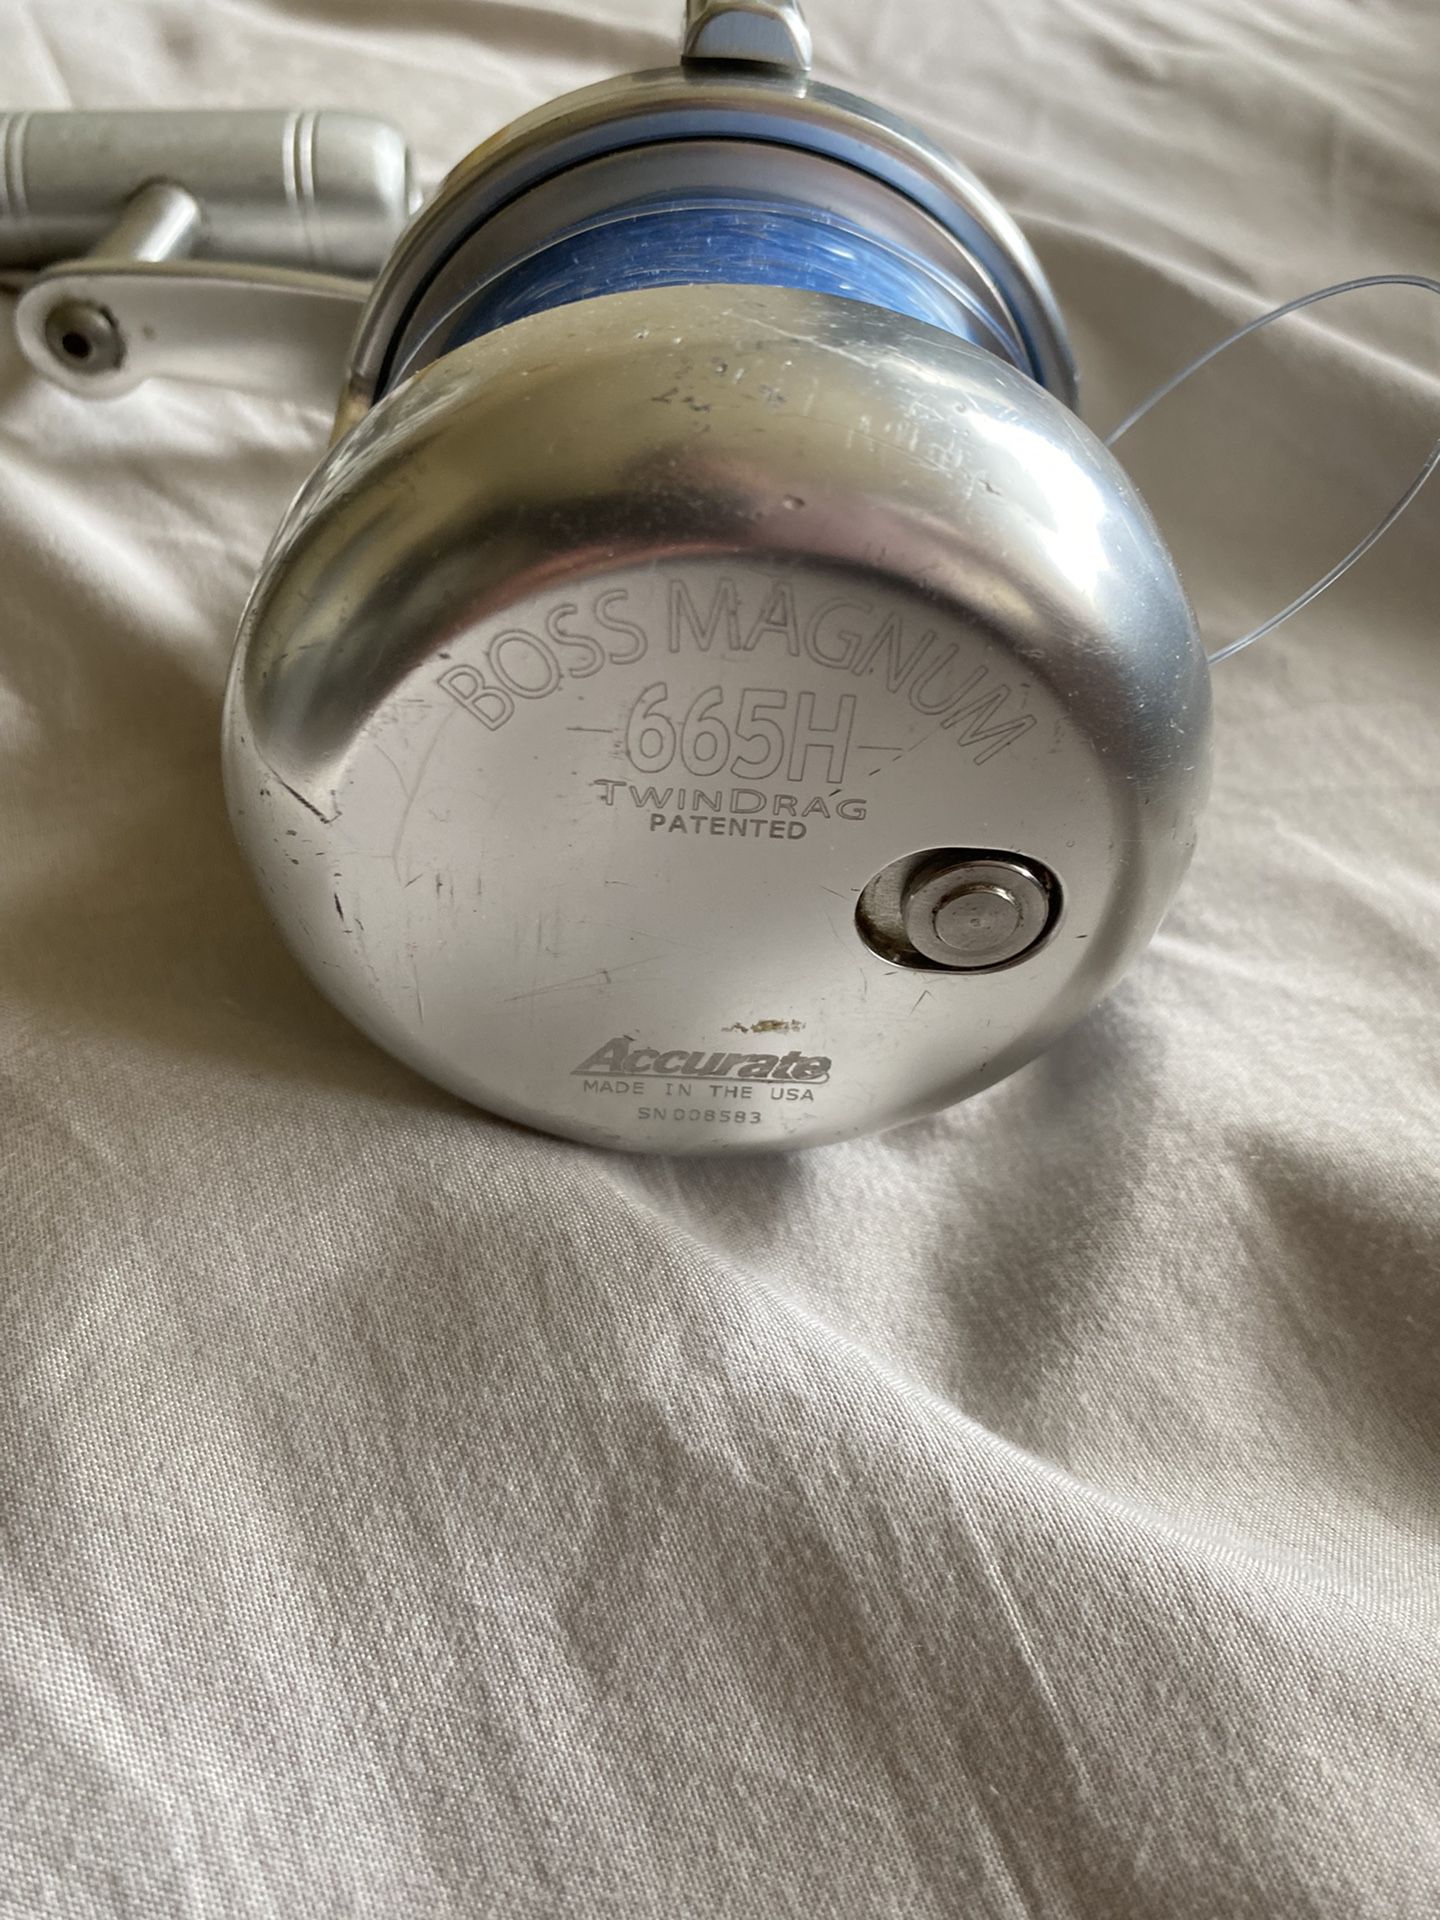 Accurate Boss Magnum 665H Fishing Reel for Sale in San Diego, CA